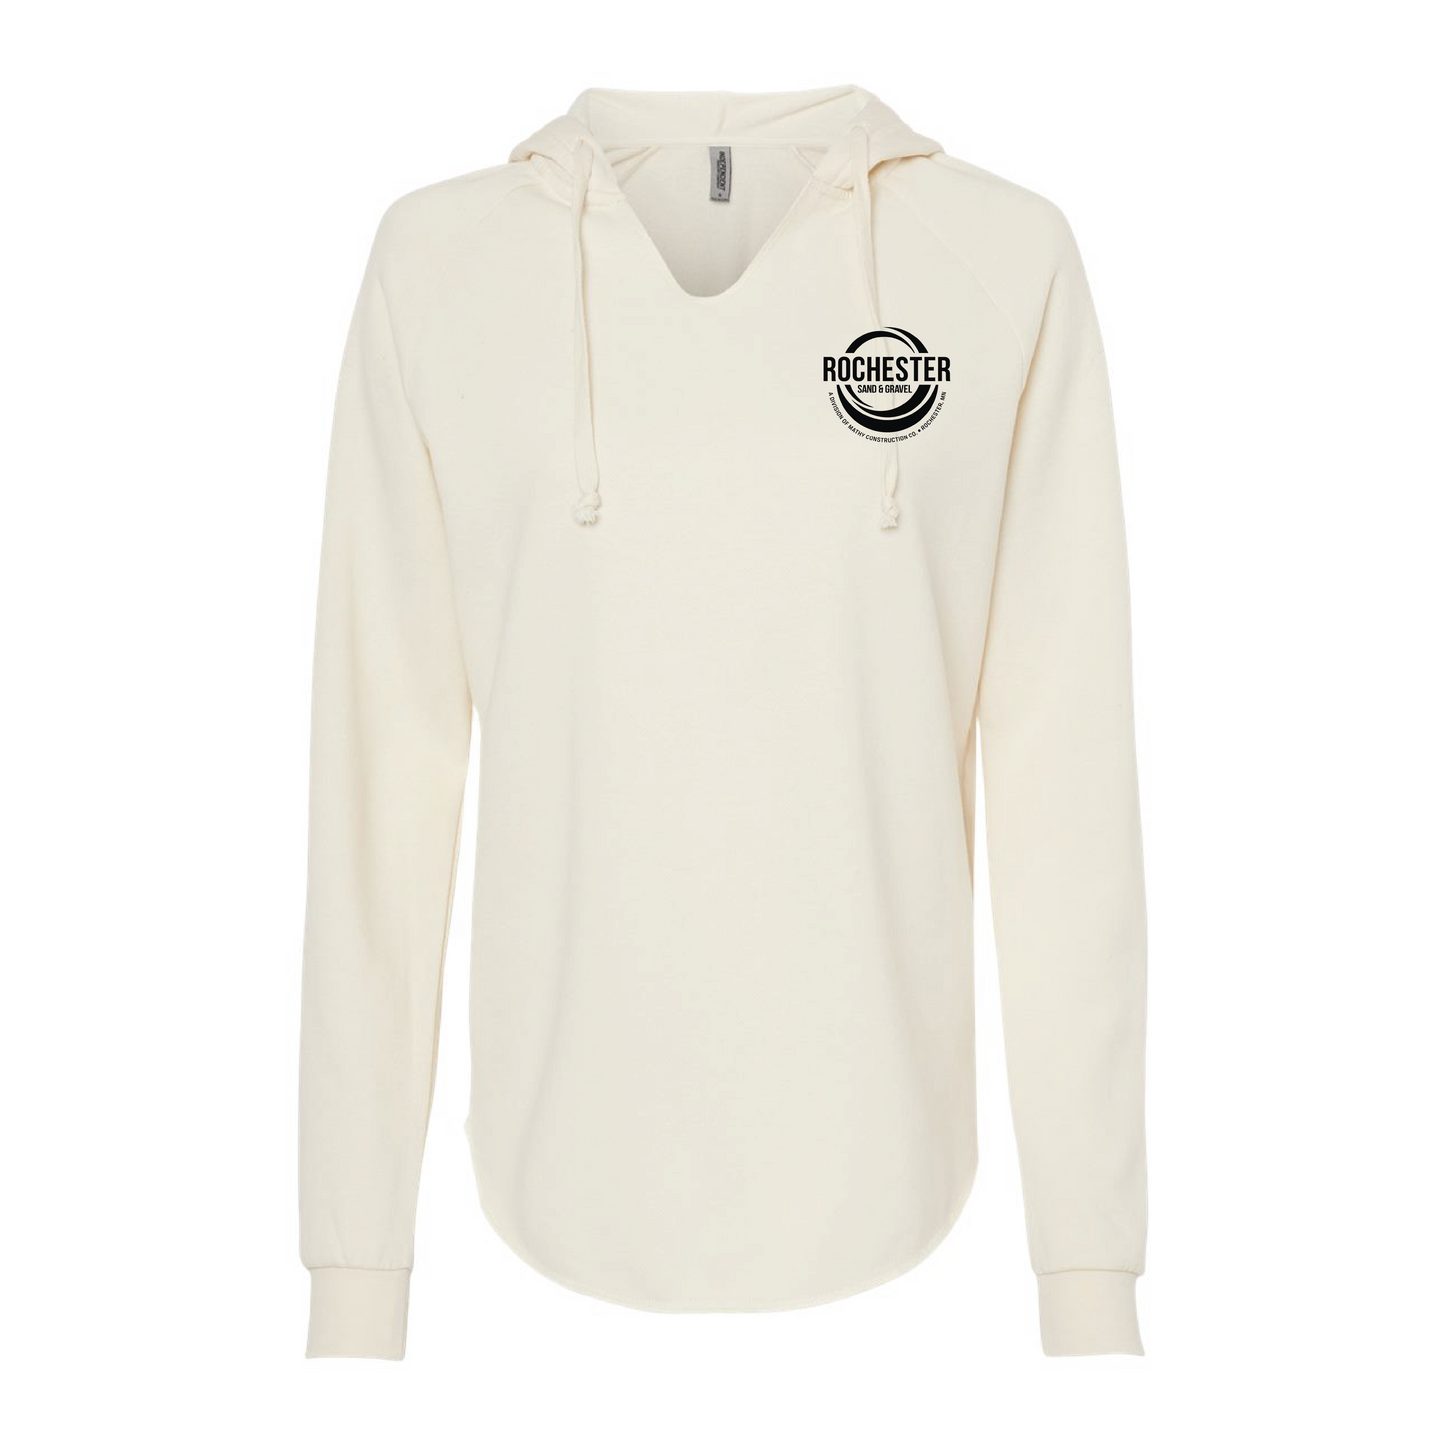 Rochester Sand and Gravel Ladies Limited Edition Fleece